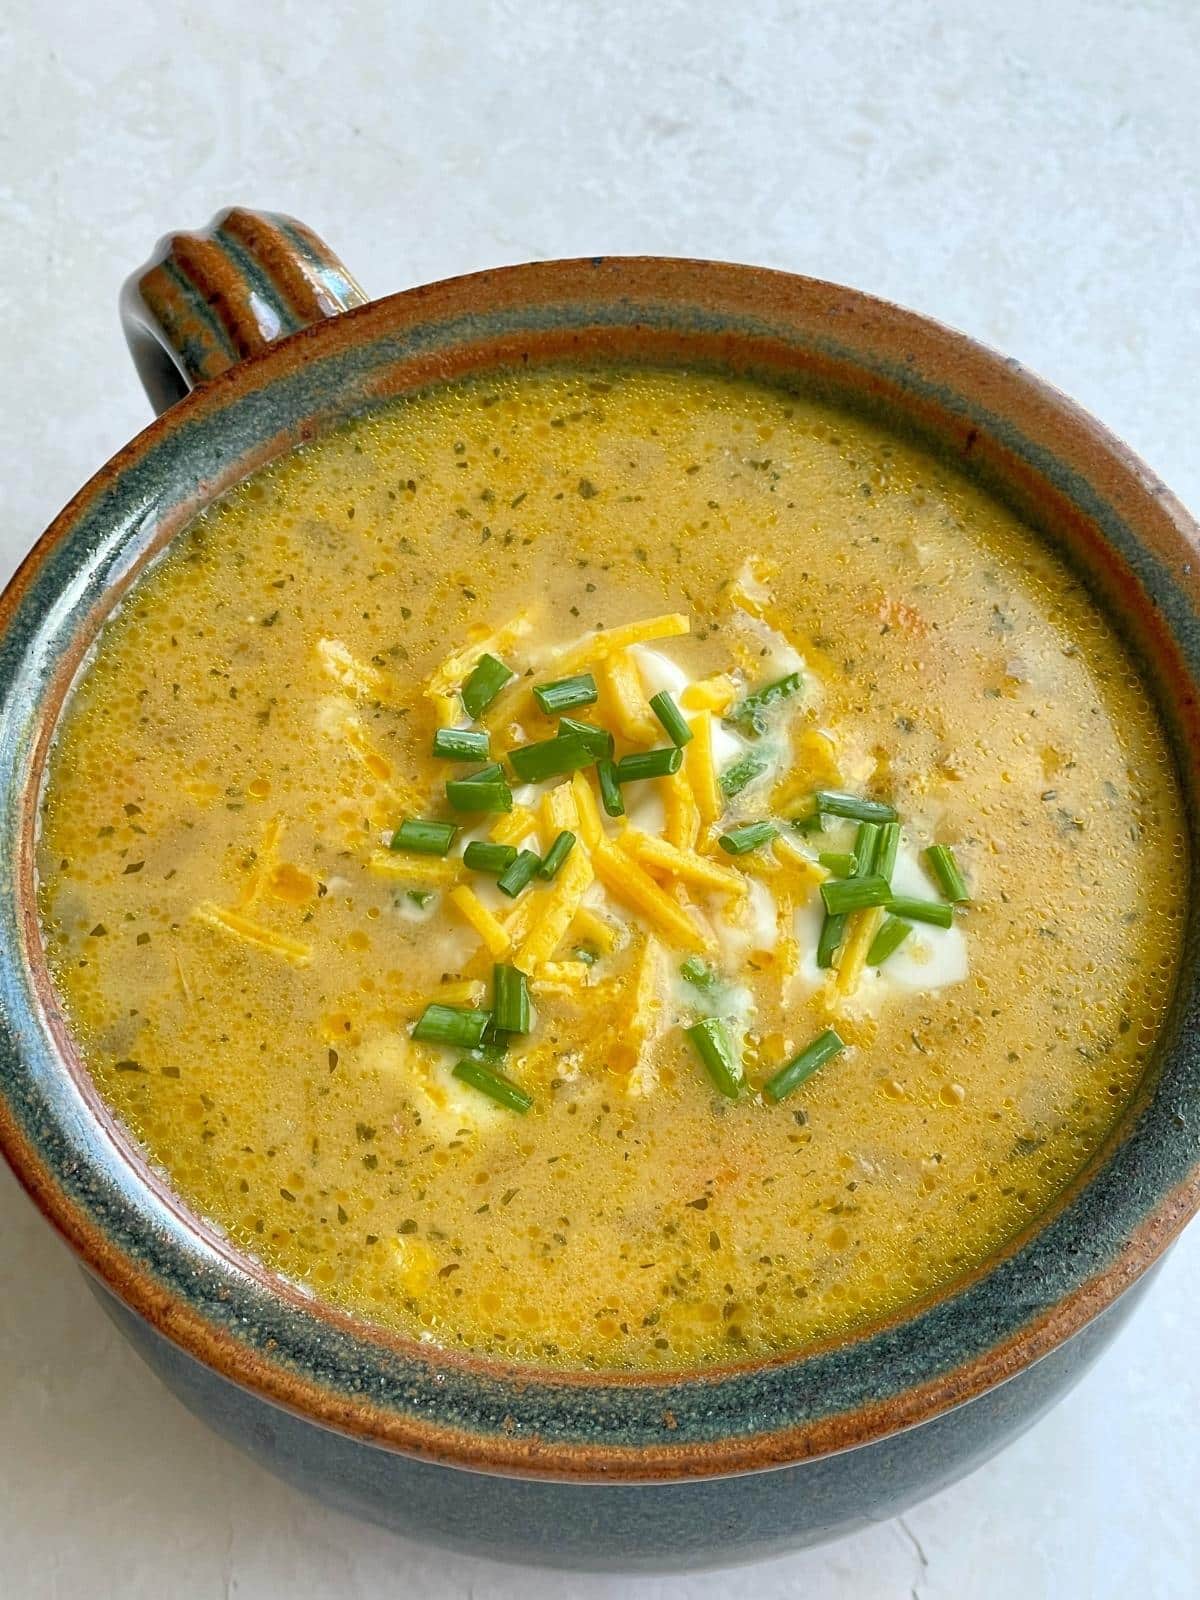 Potato soup with toppings.